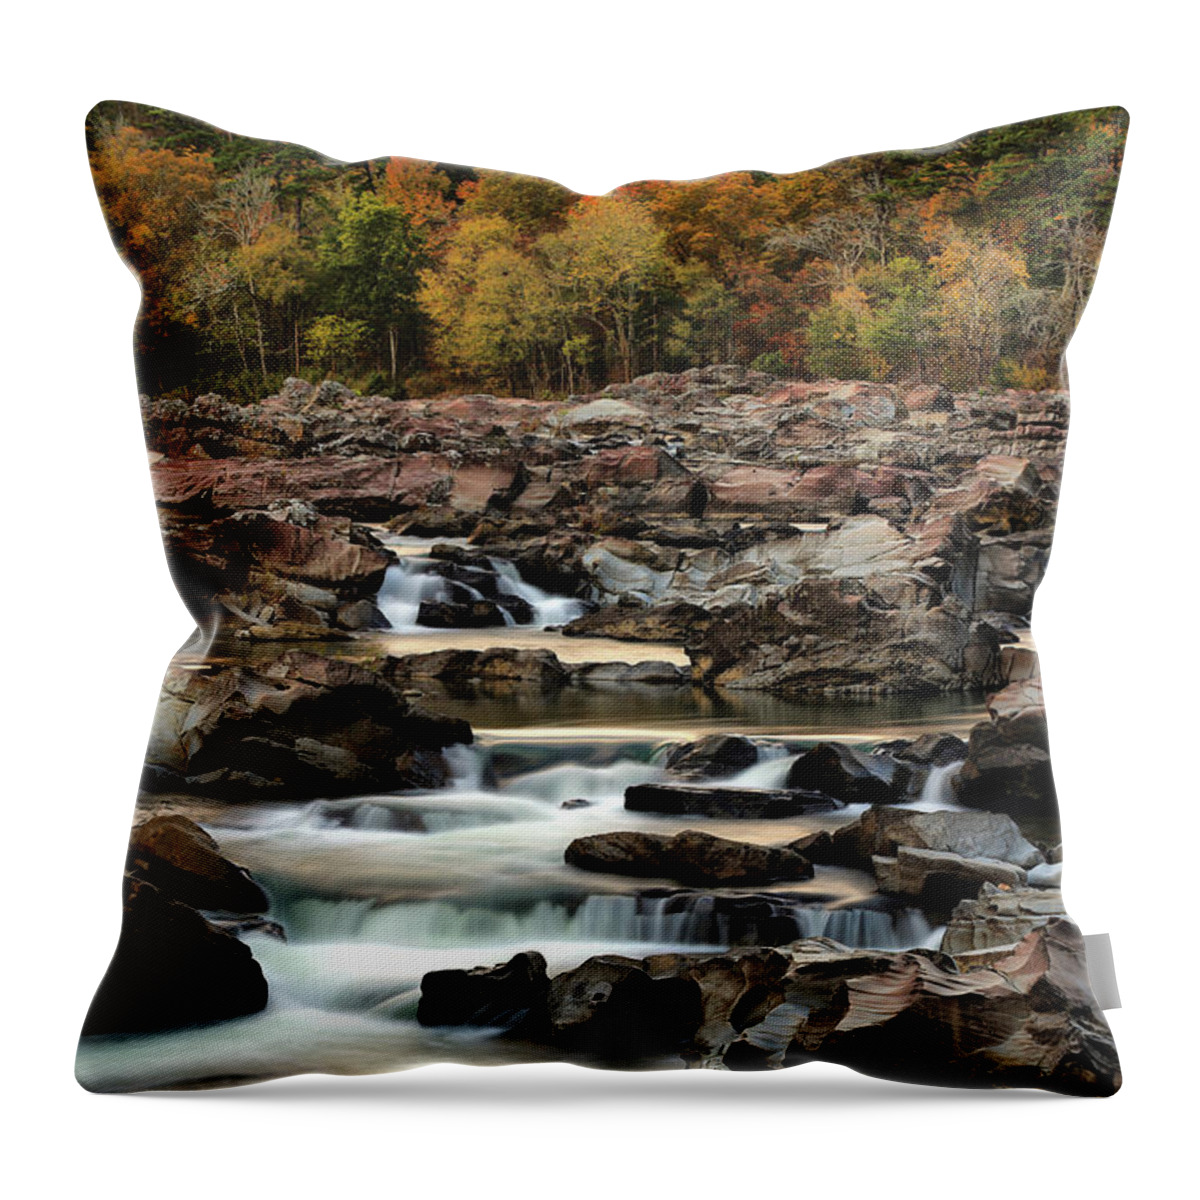  Throw Pillow featuring the photograph Cossatot New Fall Pic by William Rainey